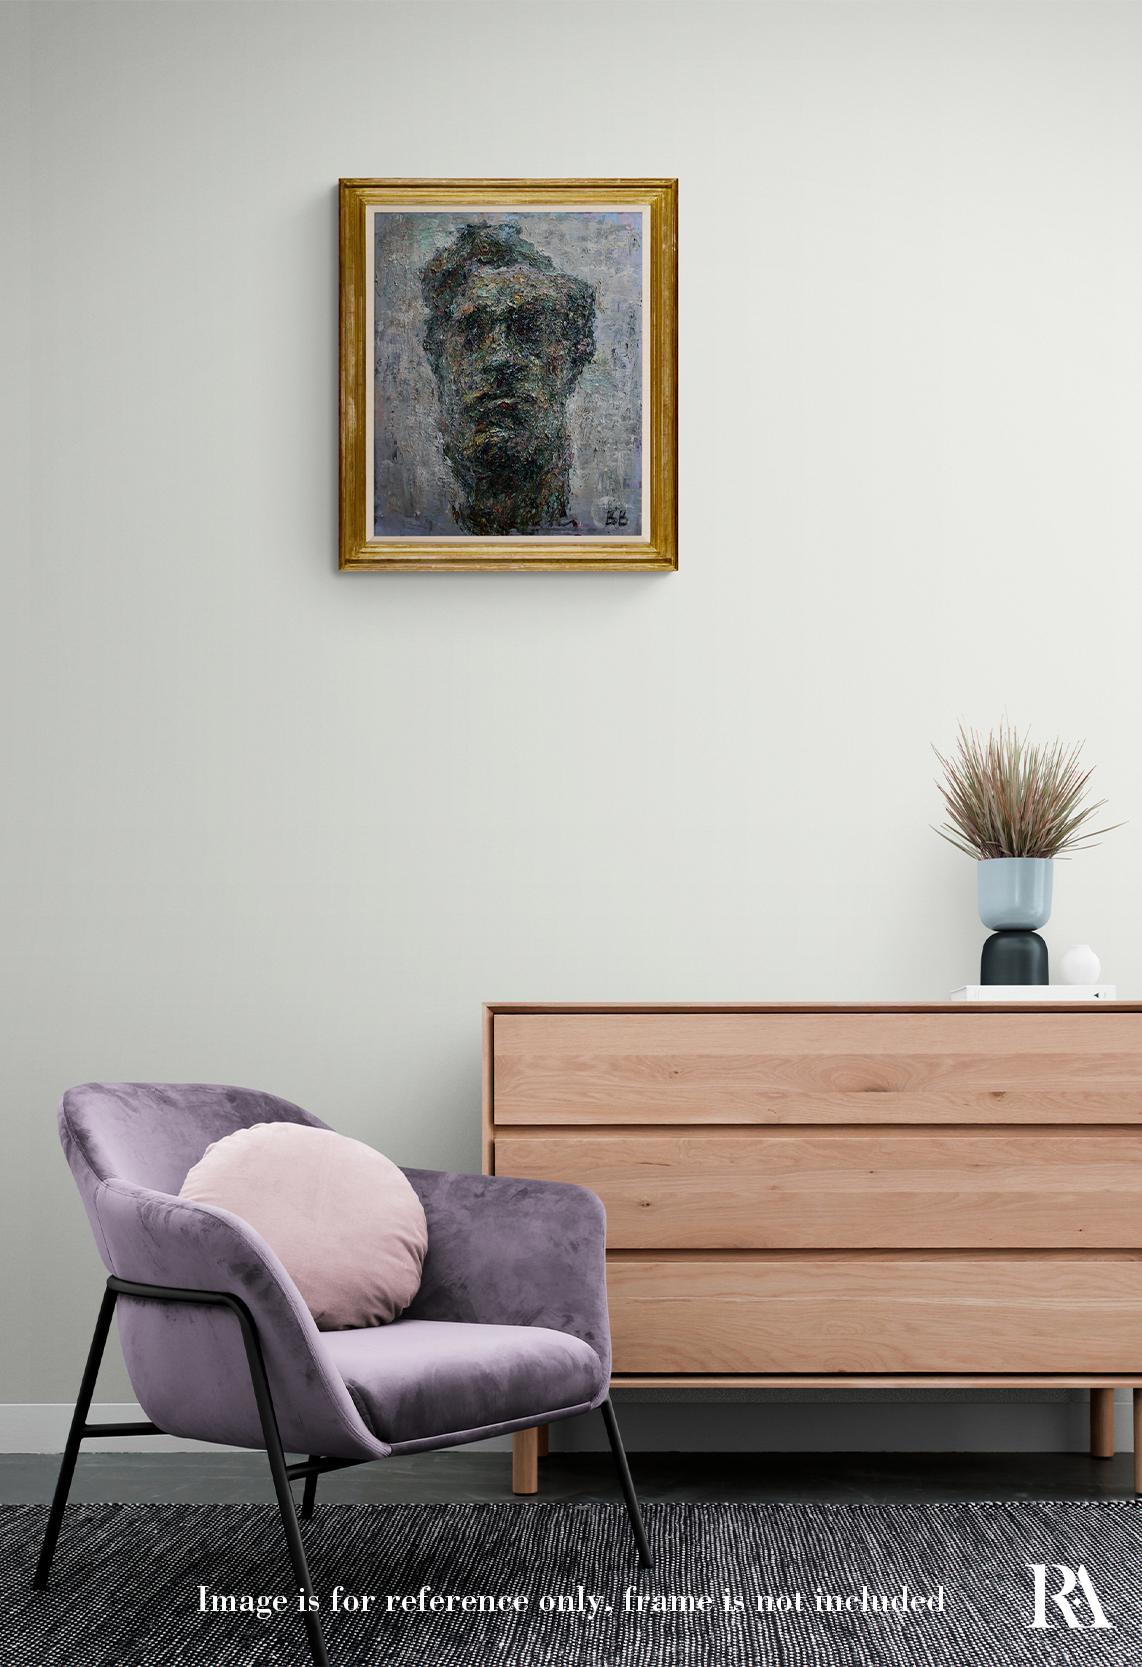 Study of a Bourdelle's Sculpture Beethoven - 21st Century Contemporary Painting - Gray Portrait Painting by Varvara Vyborova